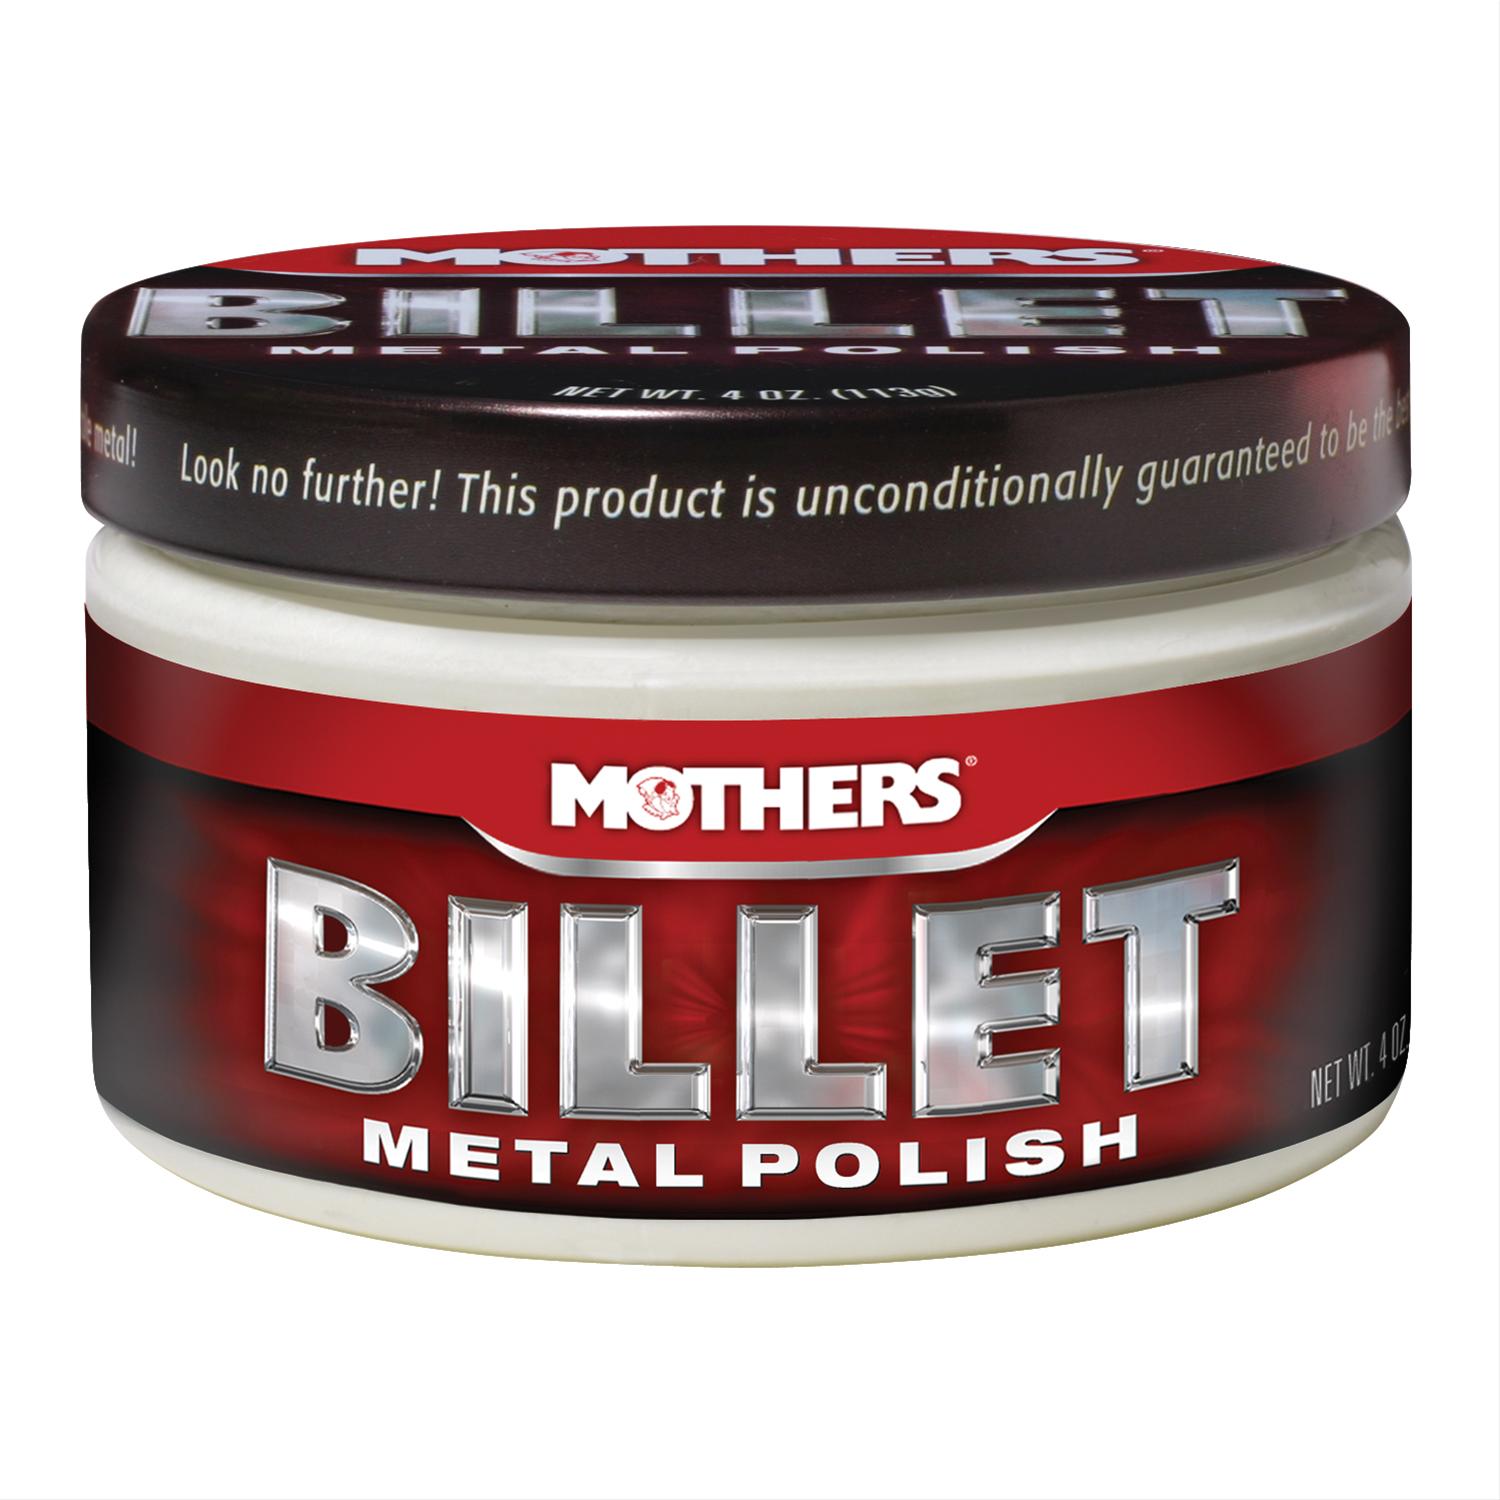 Product Review: Mothers Mag & Aluminum Polish